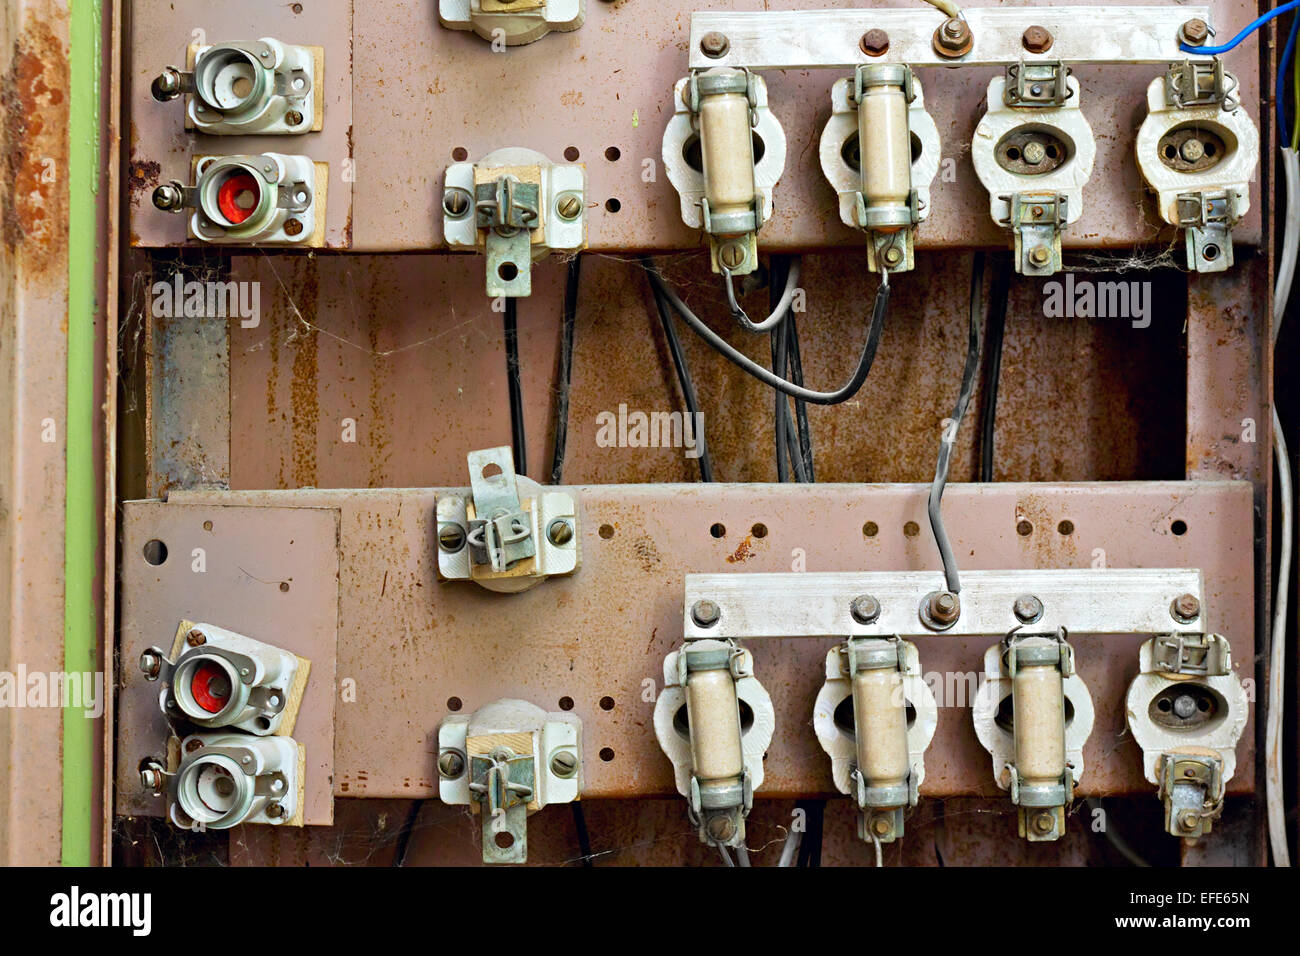 old switchboard with fuses in the background Stock Photo